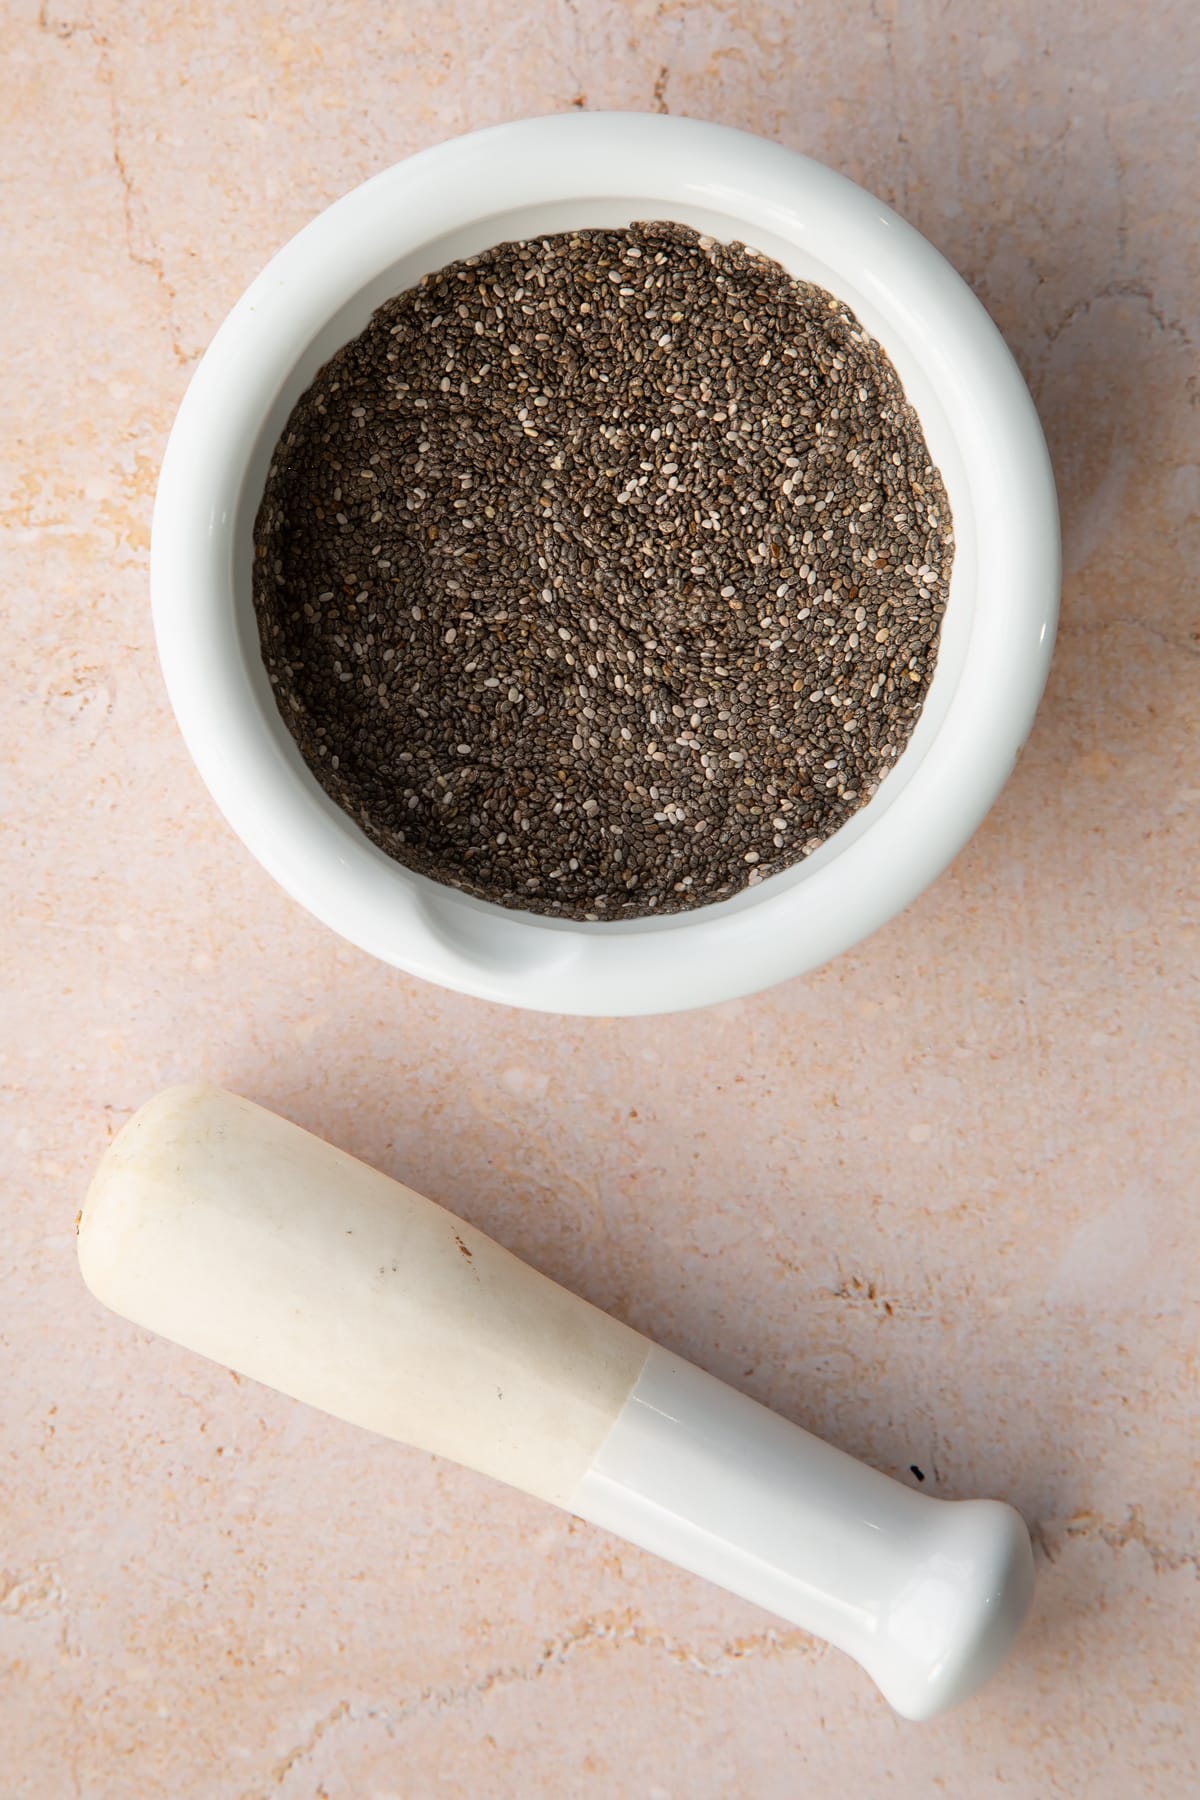 Chia seeds in a mortar with a pestle.